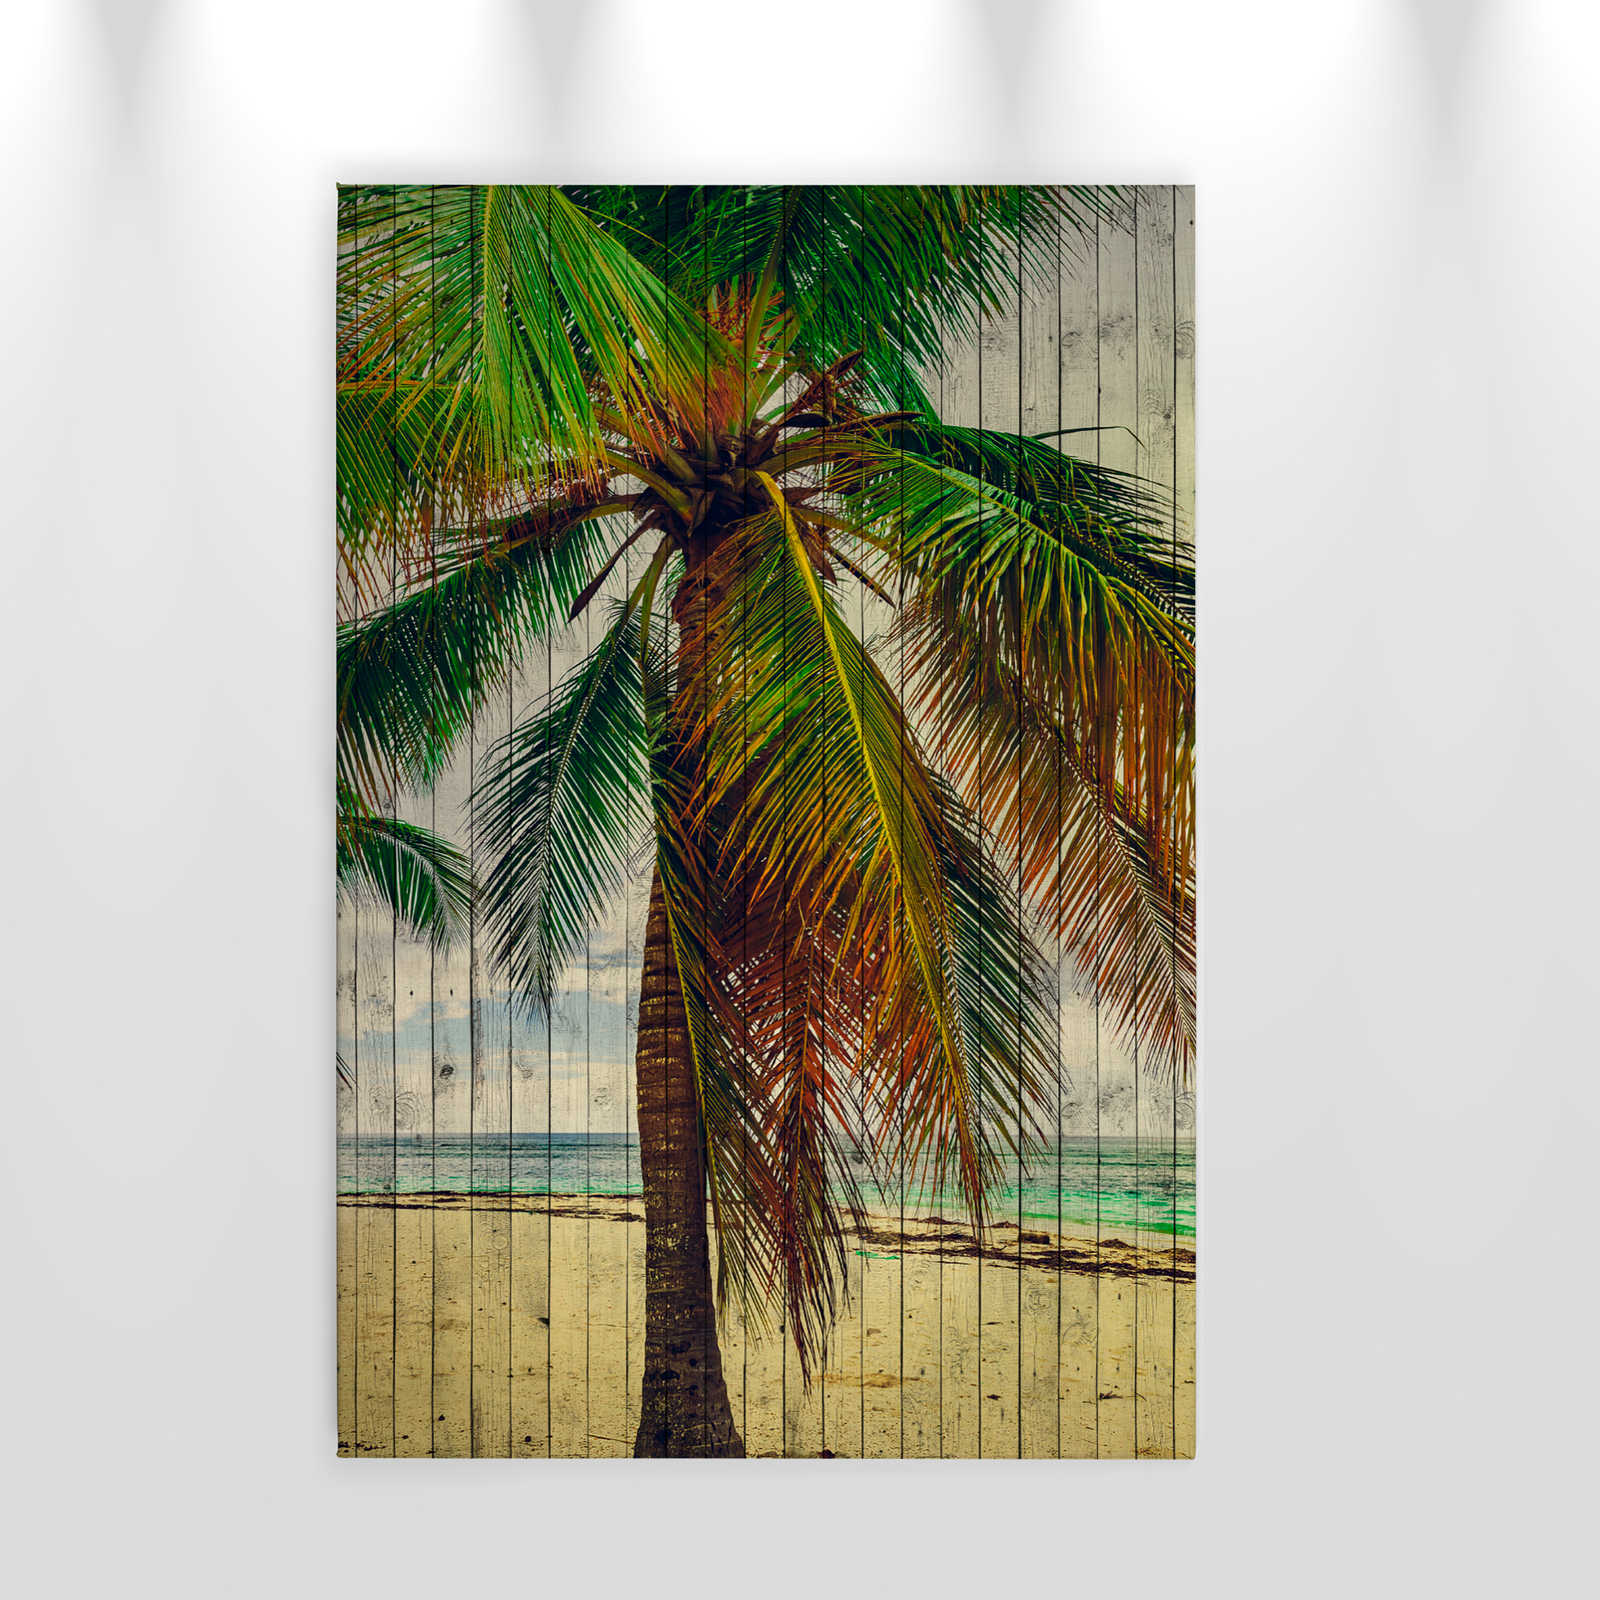             Tahiti 3 - Palm canvas picture with holiday feeling - wood panel structure - 0.60 m x 0.90 m
        